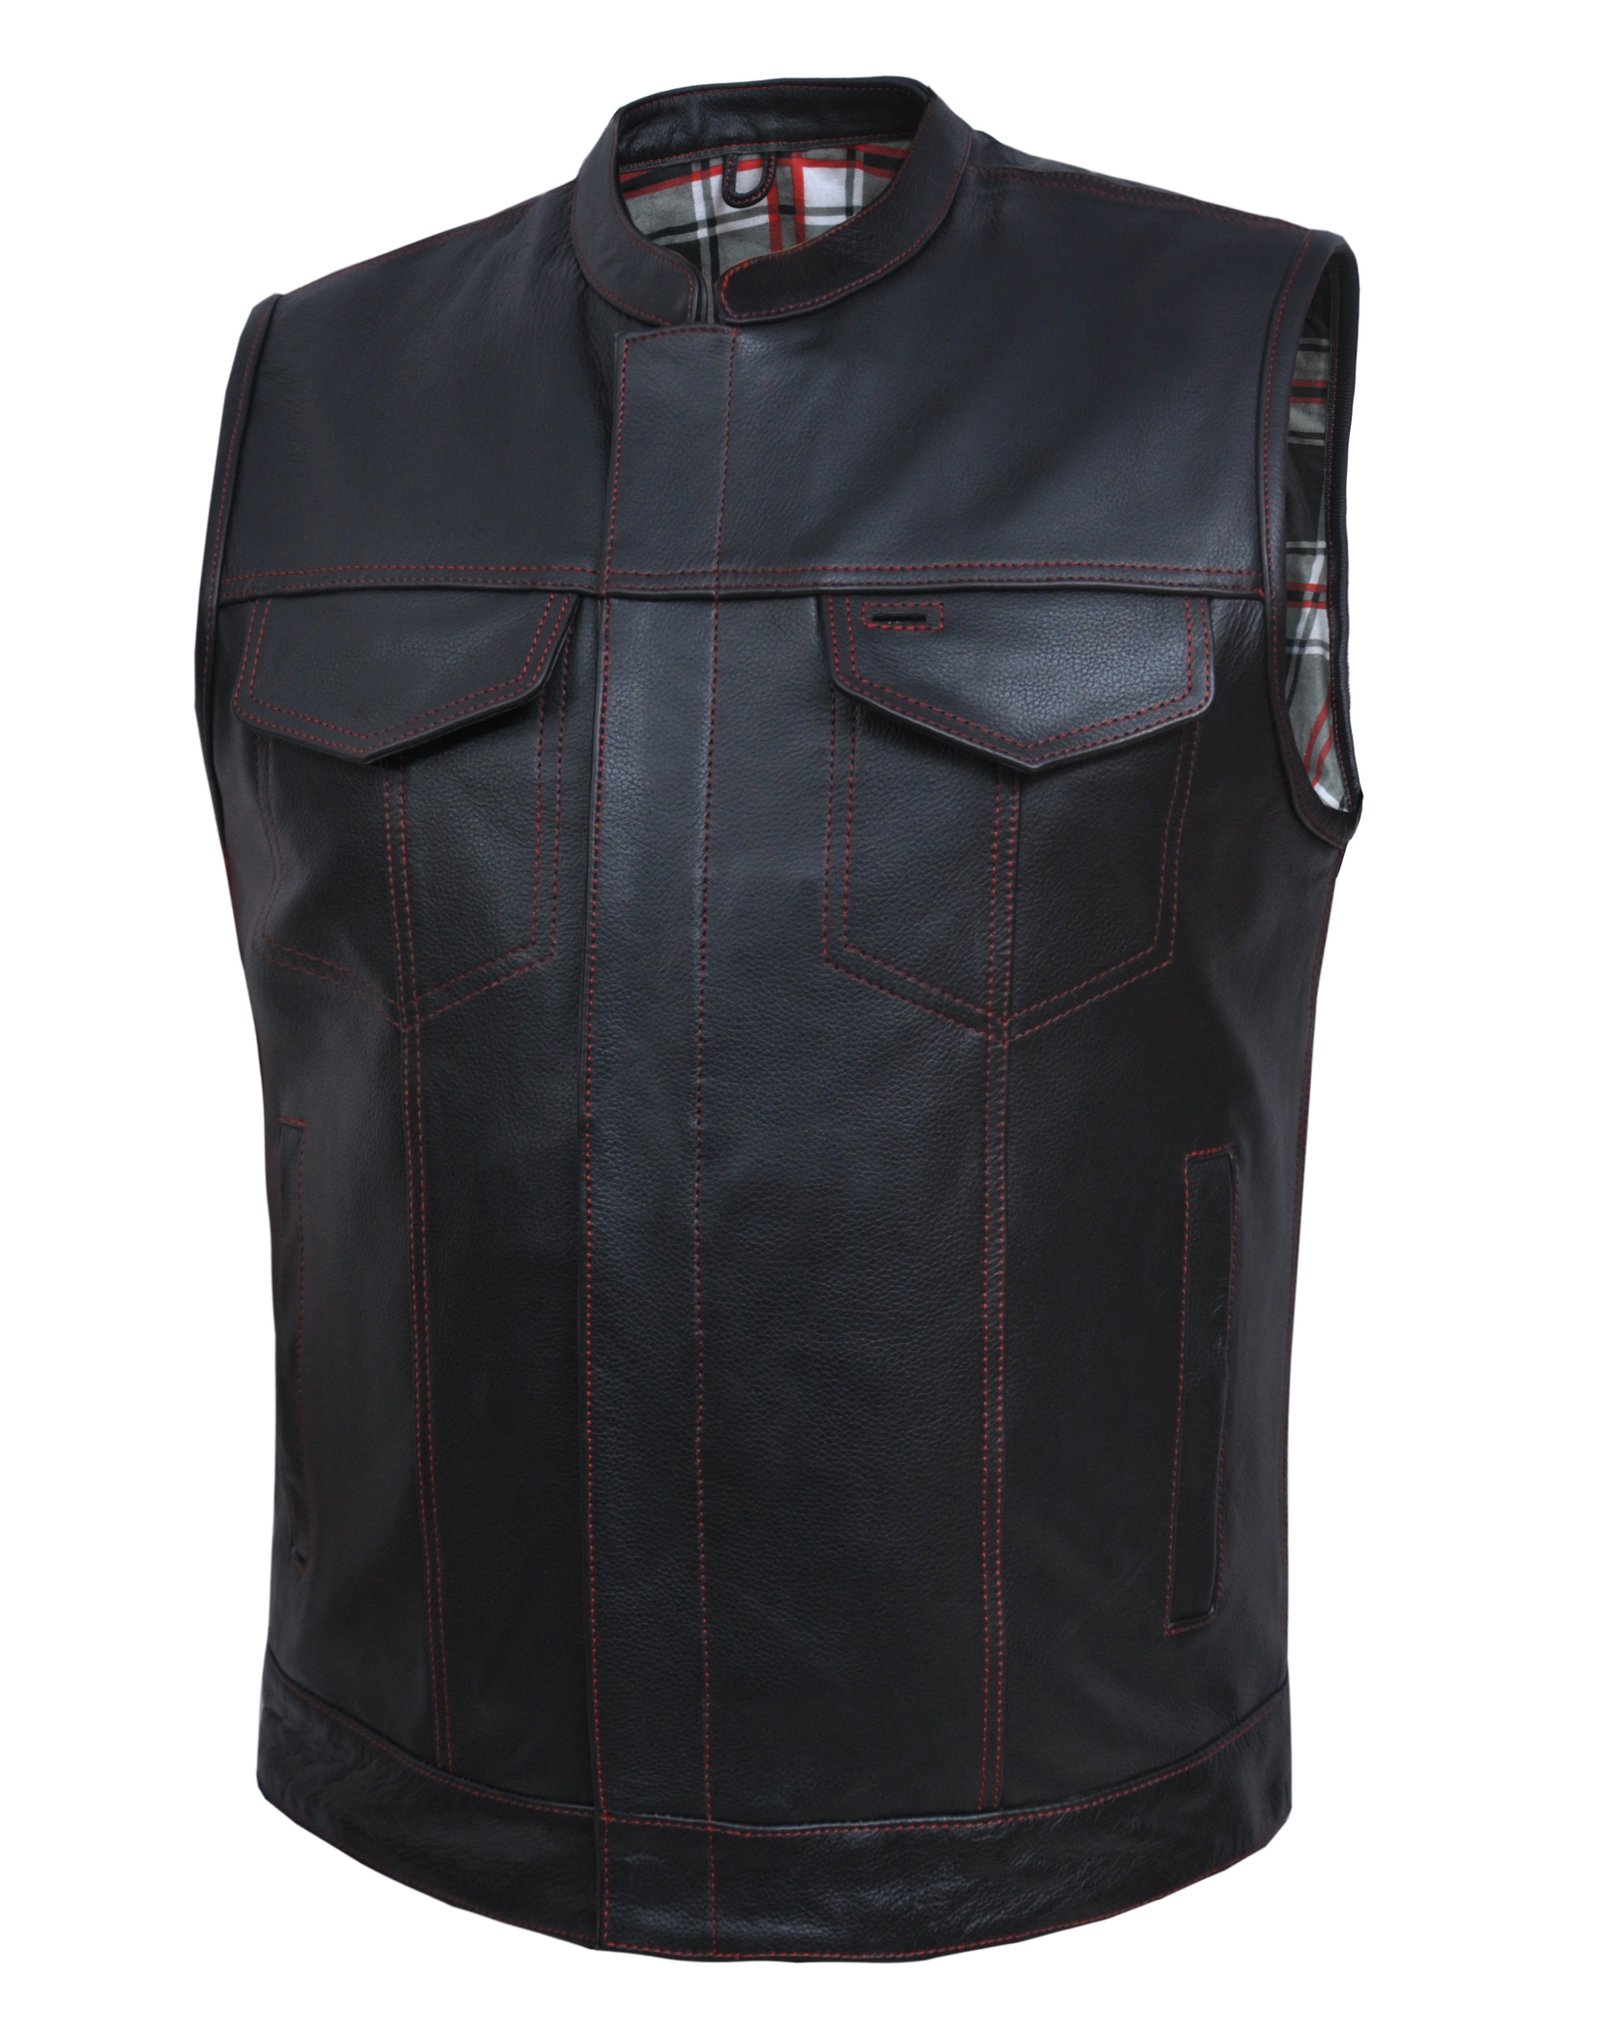 Leather Motorcycle Vest - Men's -  Black and Red Flannel Liner - 6664-01-UN